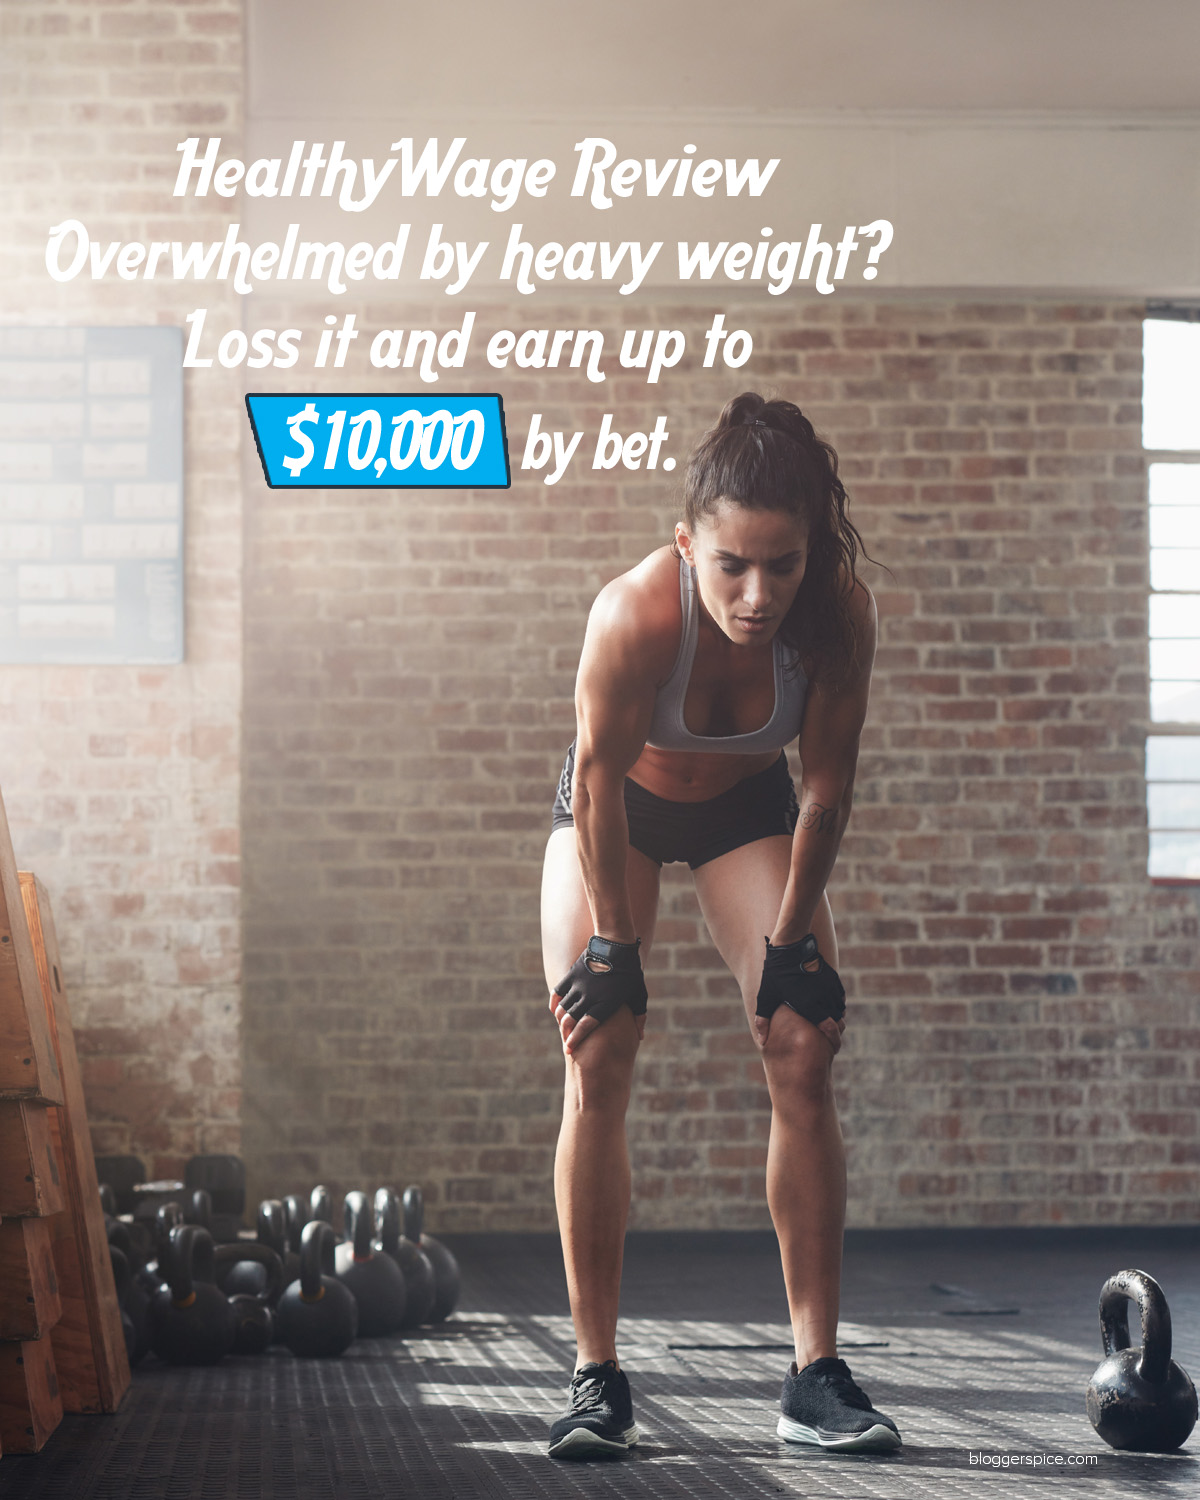 Overwhelmed by heavy weight? Loss it with healthwage and earn up to $10,000 by bet.